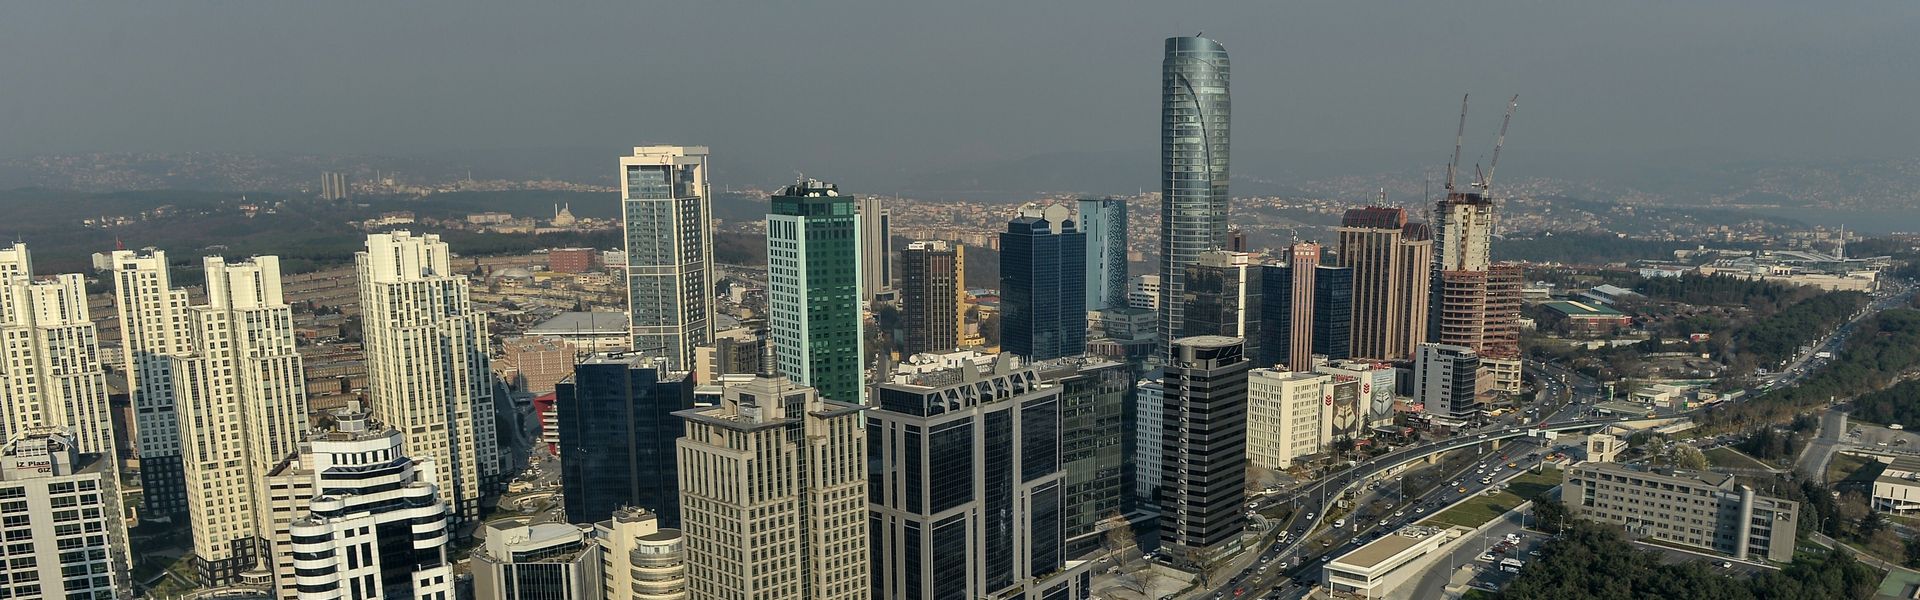 An aerial view of the business and financial district of Istanbul, Turkey.